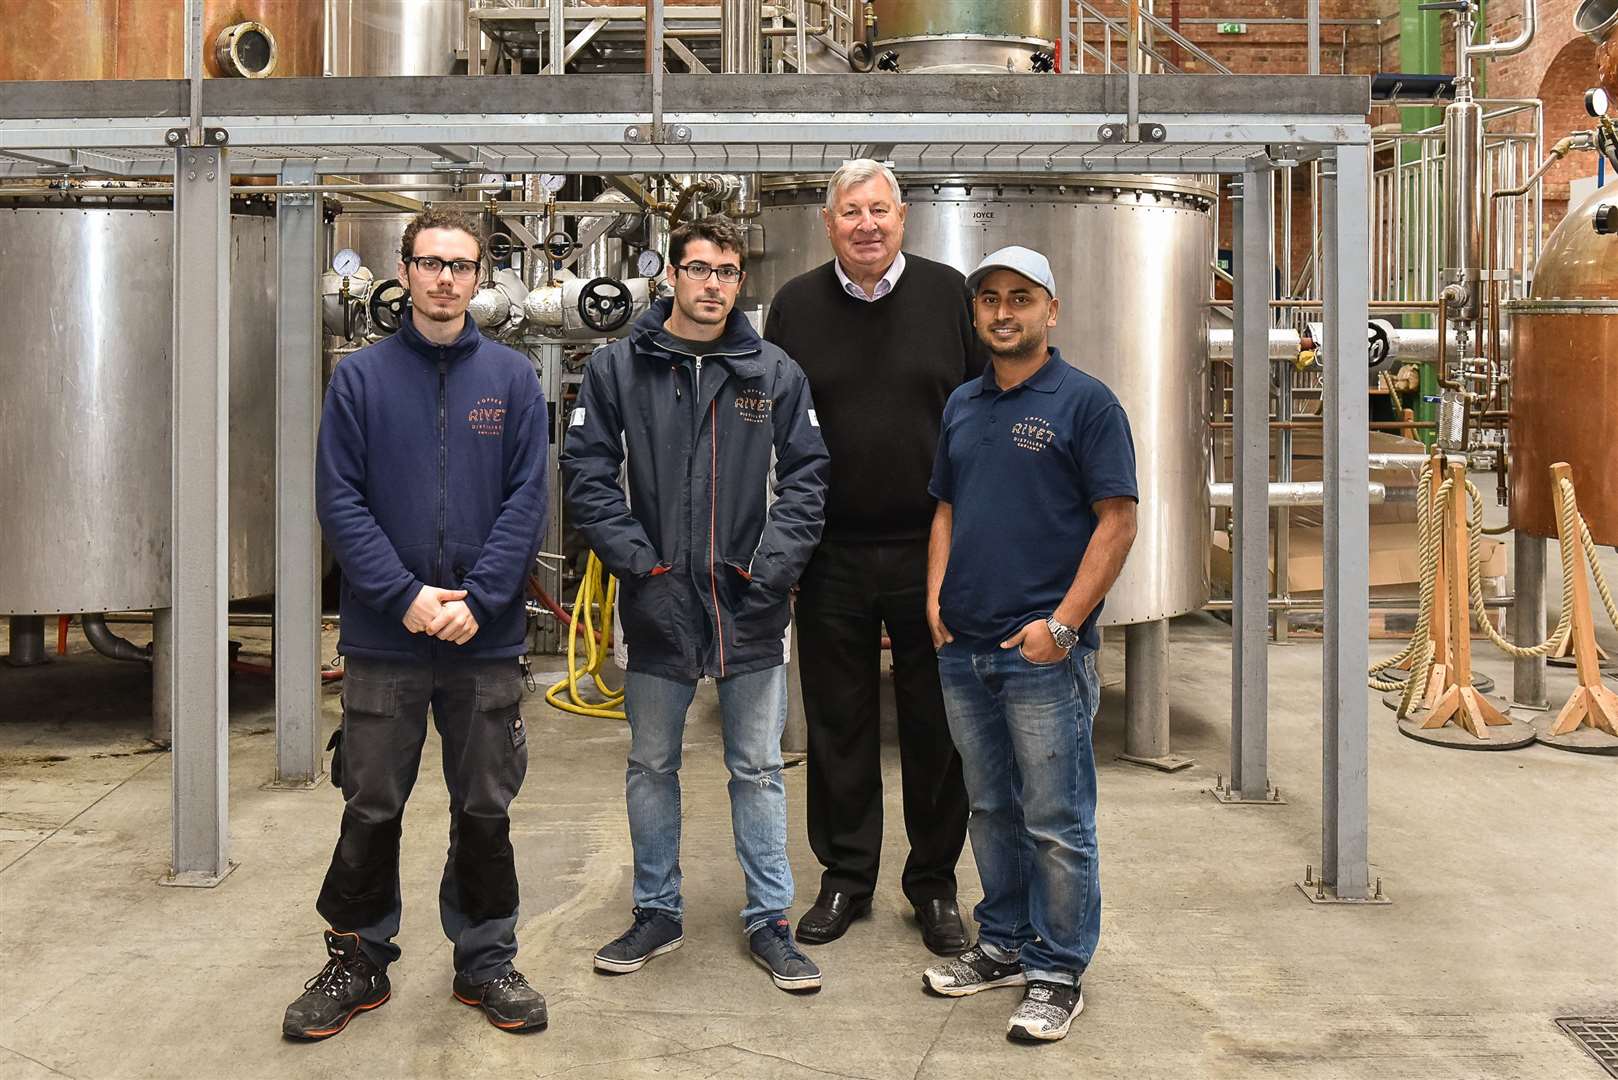 Bob Russell, one of the co-founders of Copper Rivet Distillery, Chatham Maritime with distillery workers Abhi Banik, Sergio Penades and Harrison Lambert. Picture: Tony Jones.